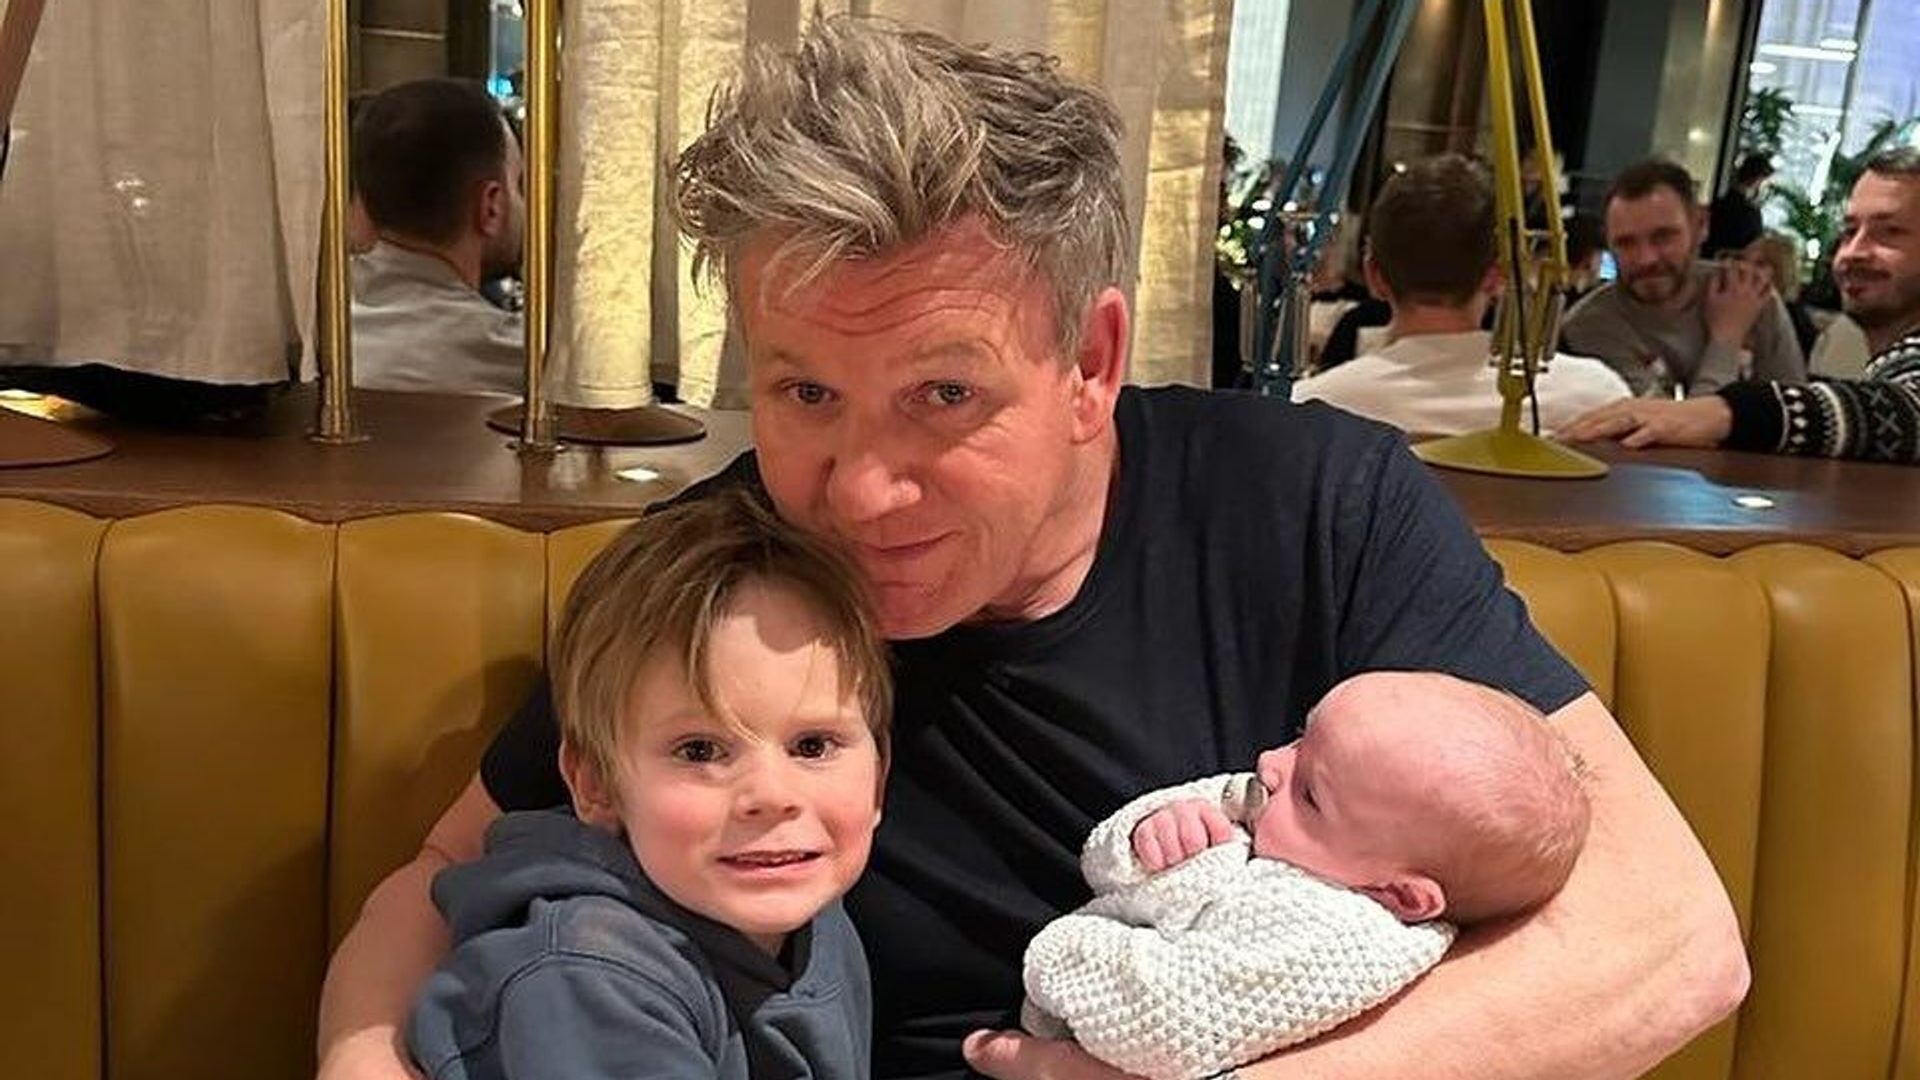 Gordon Ramsay beams alongside adorable son Jesse - and the likeness is uncanny